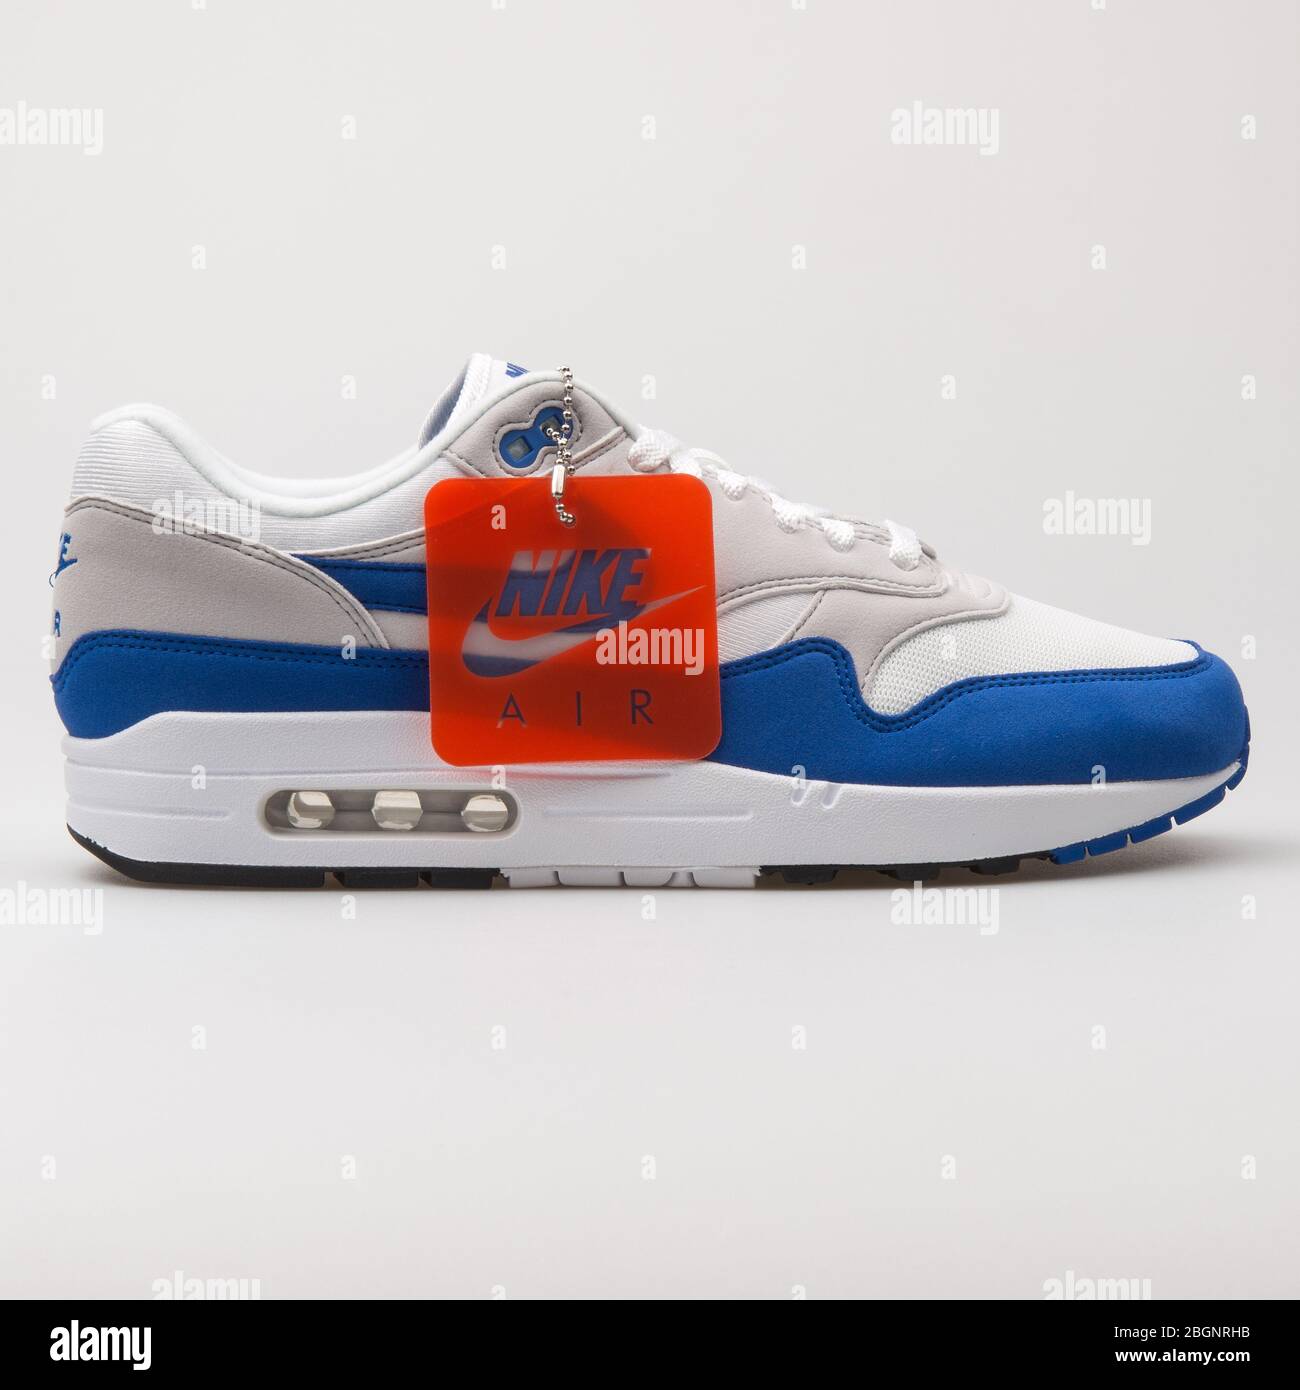 VIENNA, AUSTRIA - AUGUST 24, 2017: Nike Air Max 1 Anniversary white and  blue sneaker on white background Stock Photo - Alamy